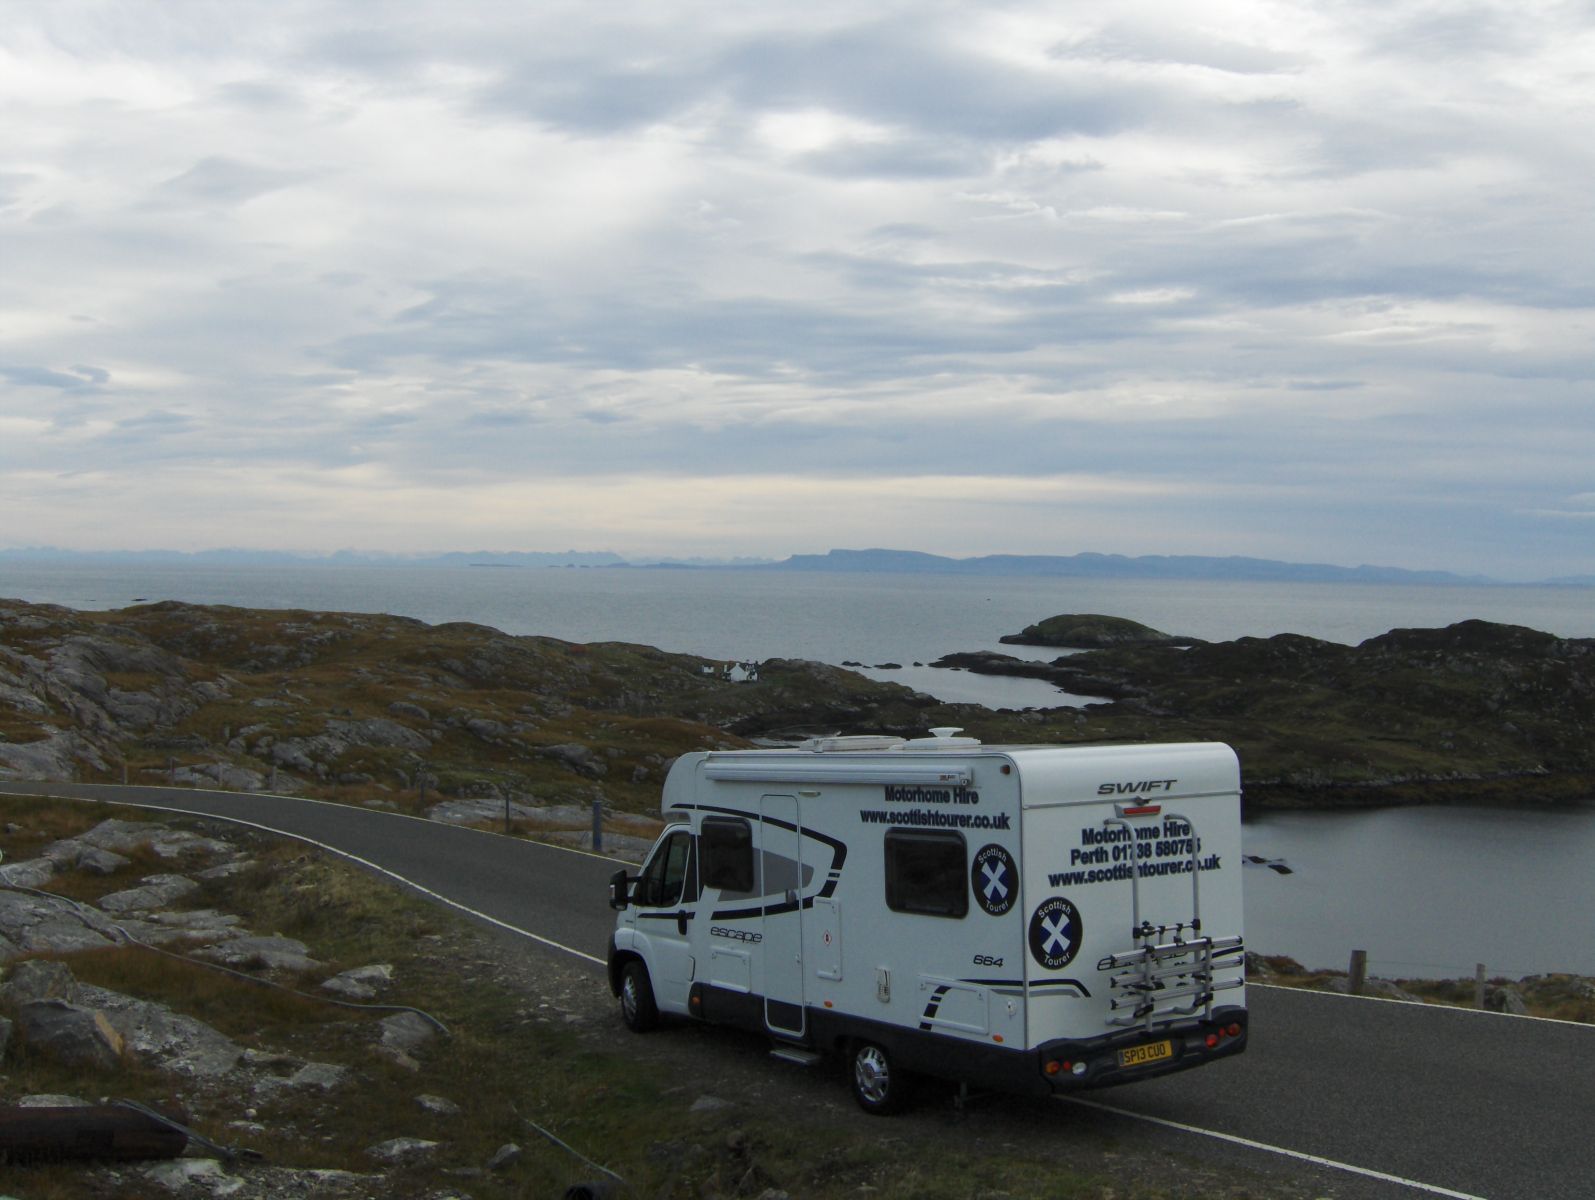 Enjoying the view from the motorhome